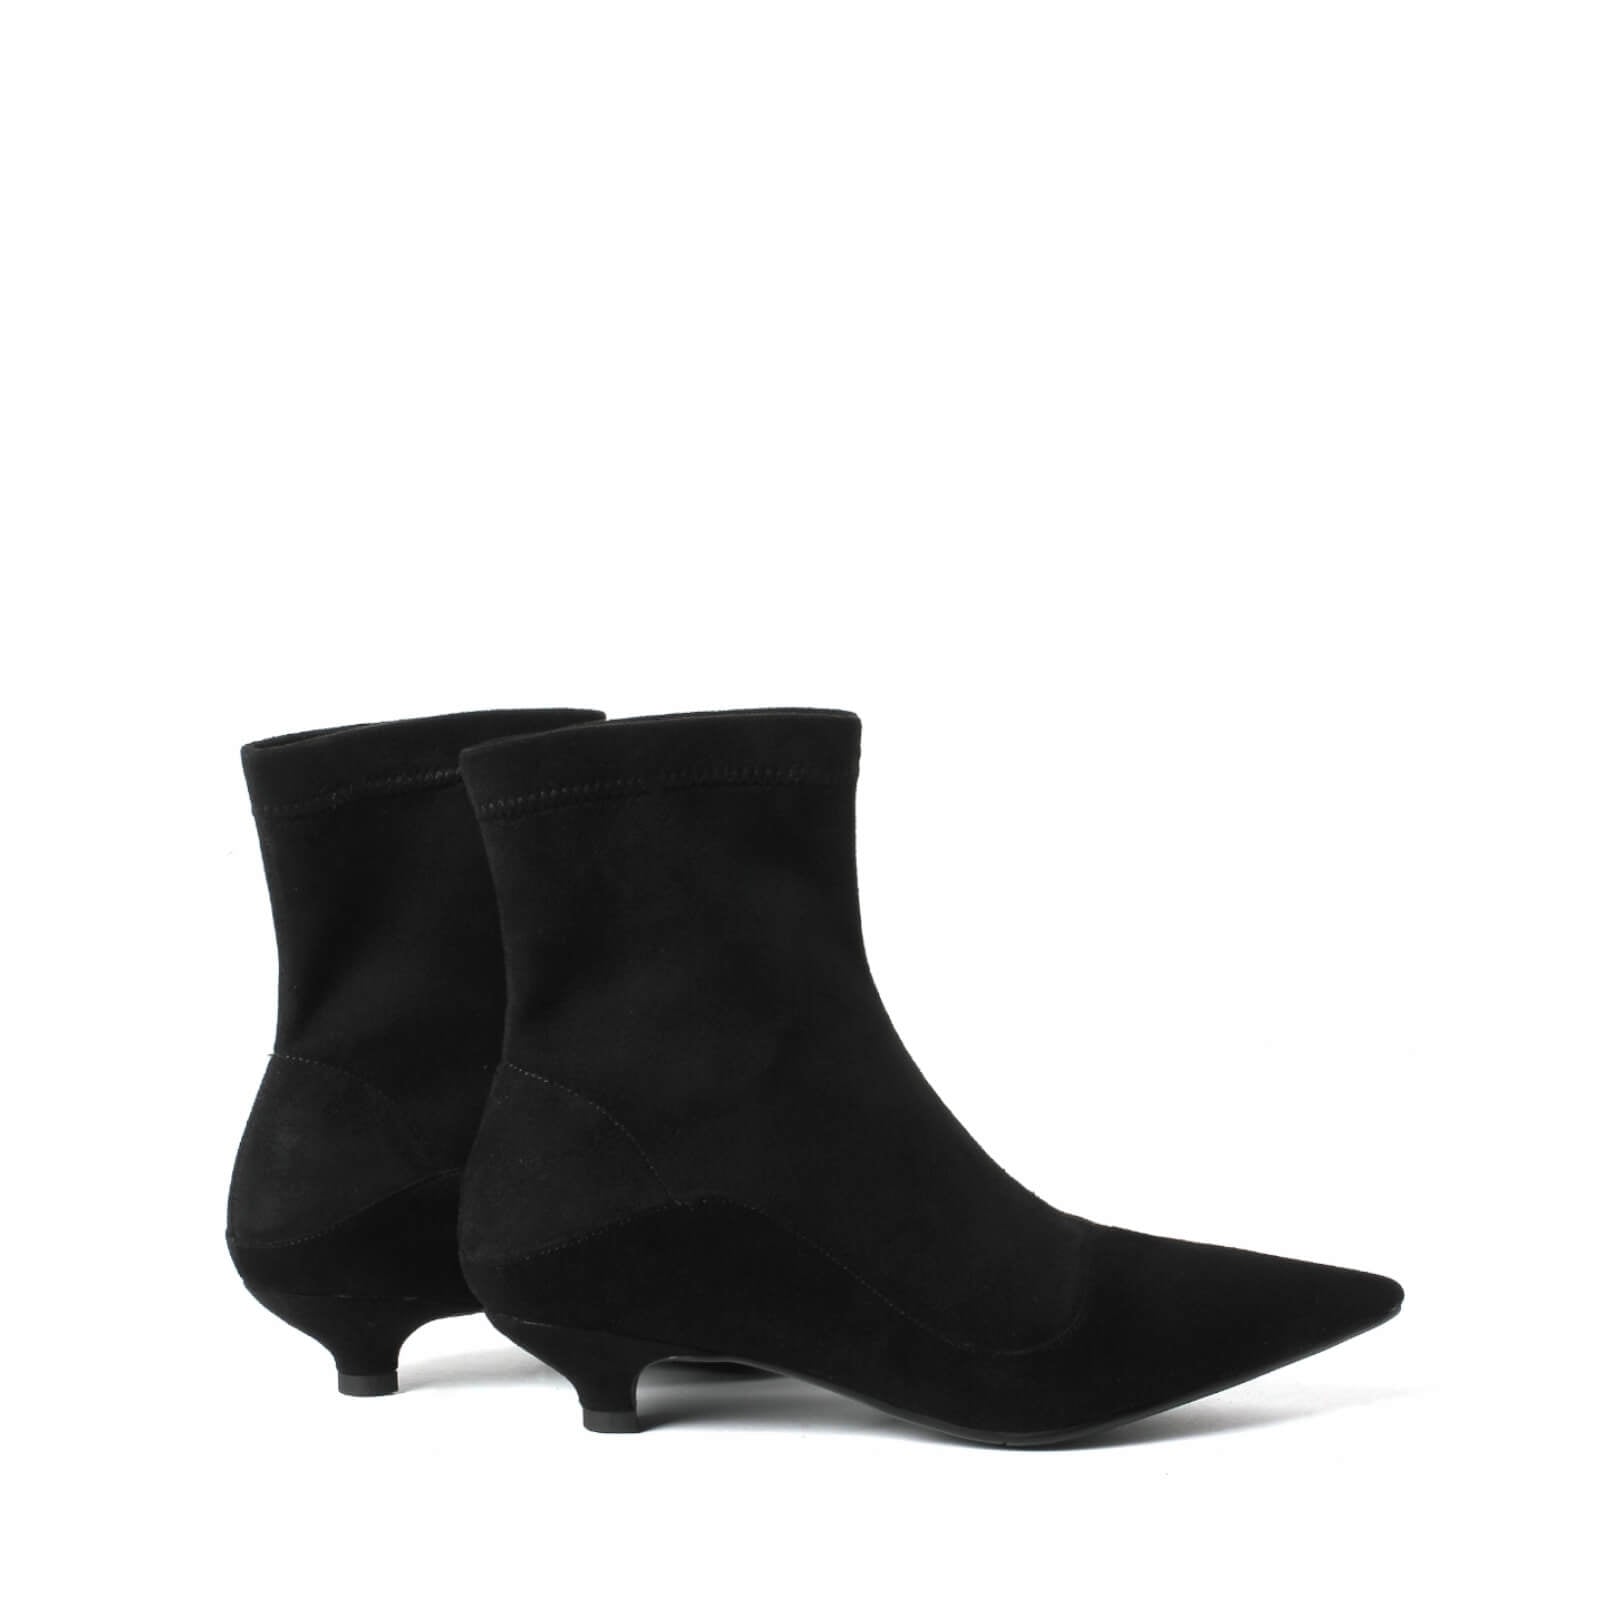 Kaly-Kitten-Heels-Pointed-Toe-Stitching-Vamp-Black-Ankle-Boots-Suede-3